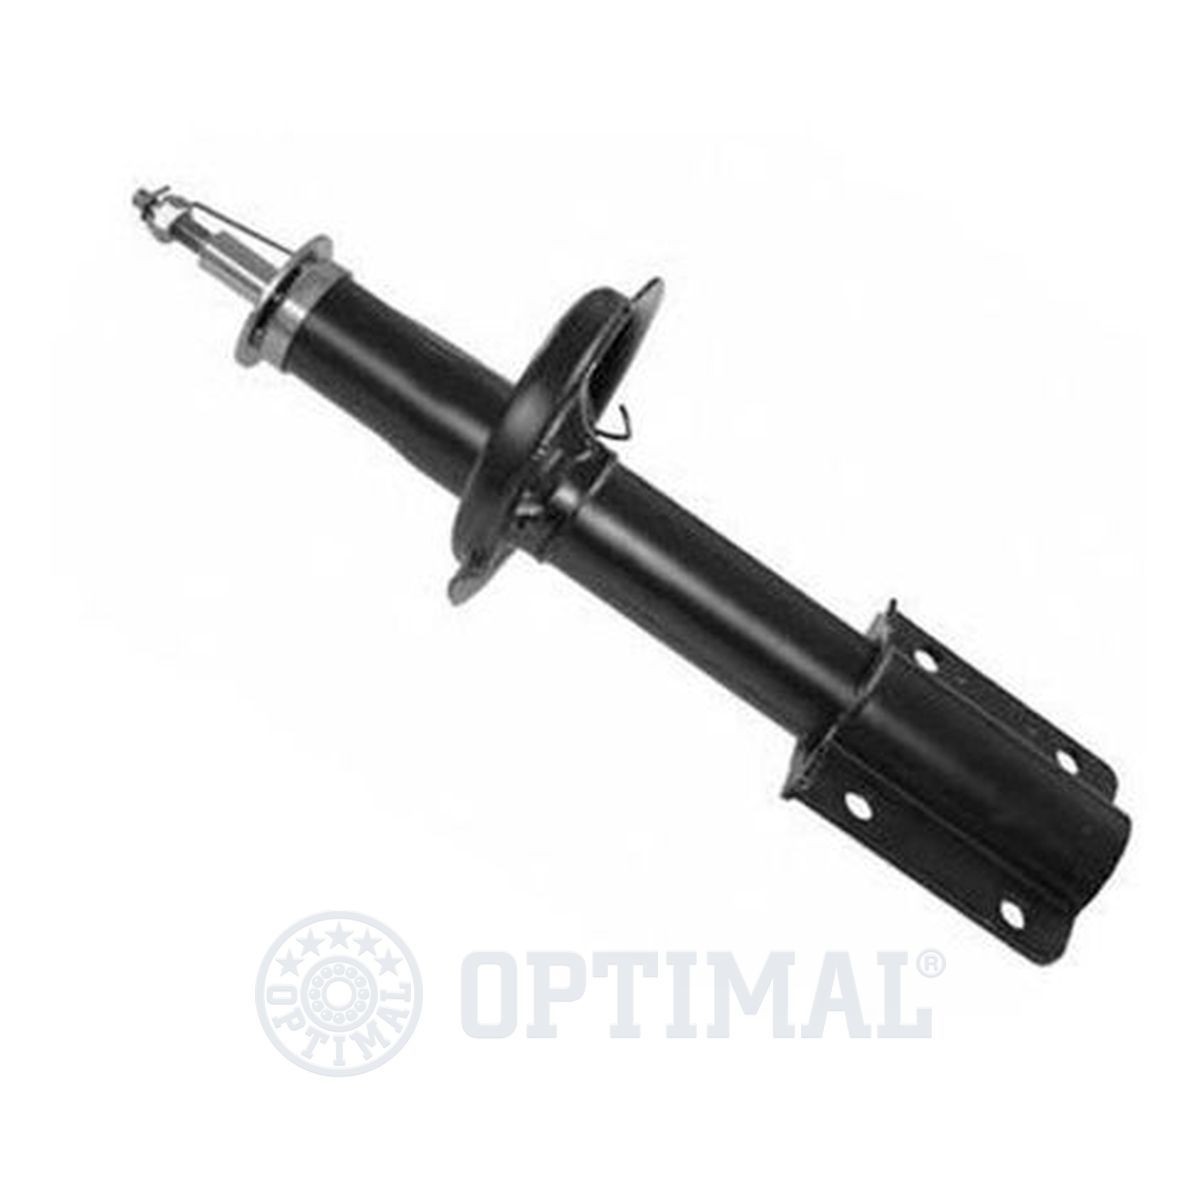 OPTIMAL A-67541G Shock absorber Gas Pressure, Twin-Tube, Suspension Strut, Top pin, Bottom Clamp, M14x1,5